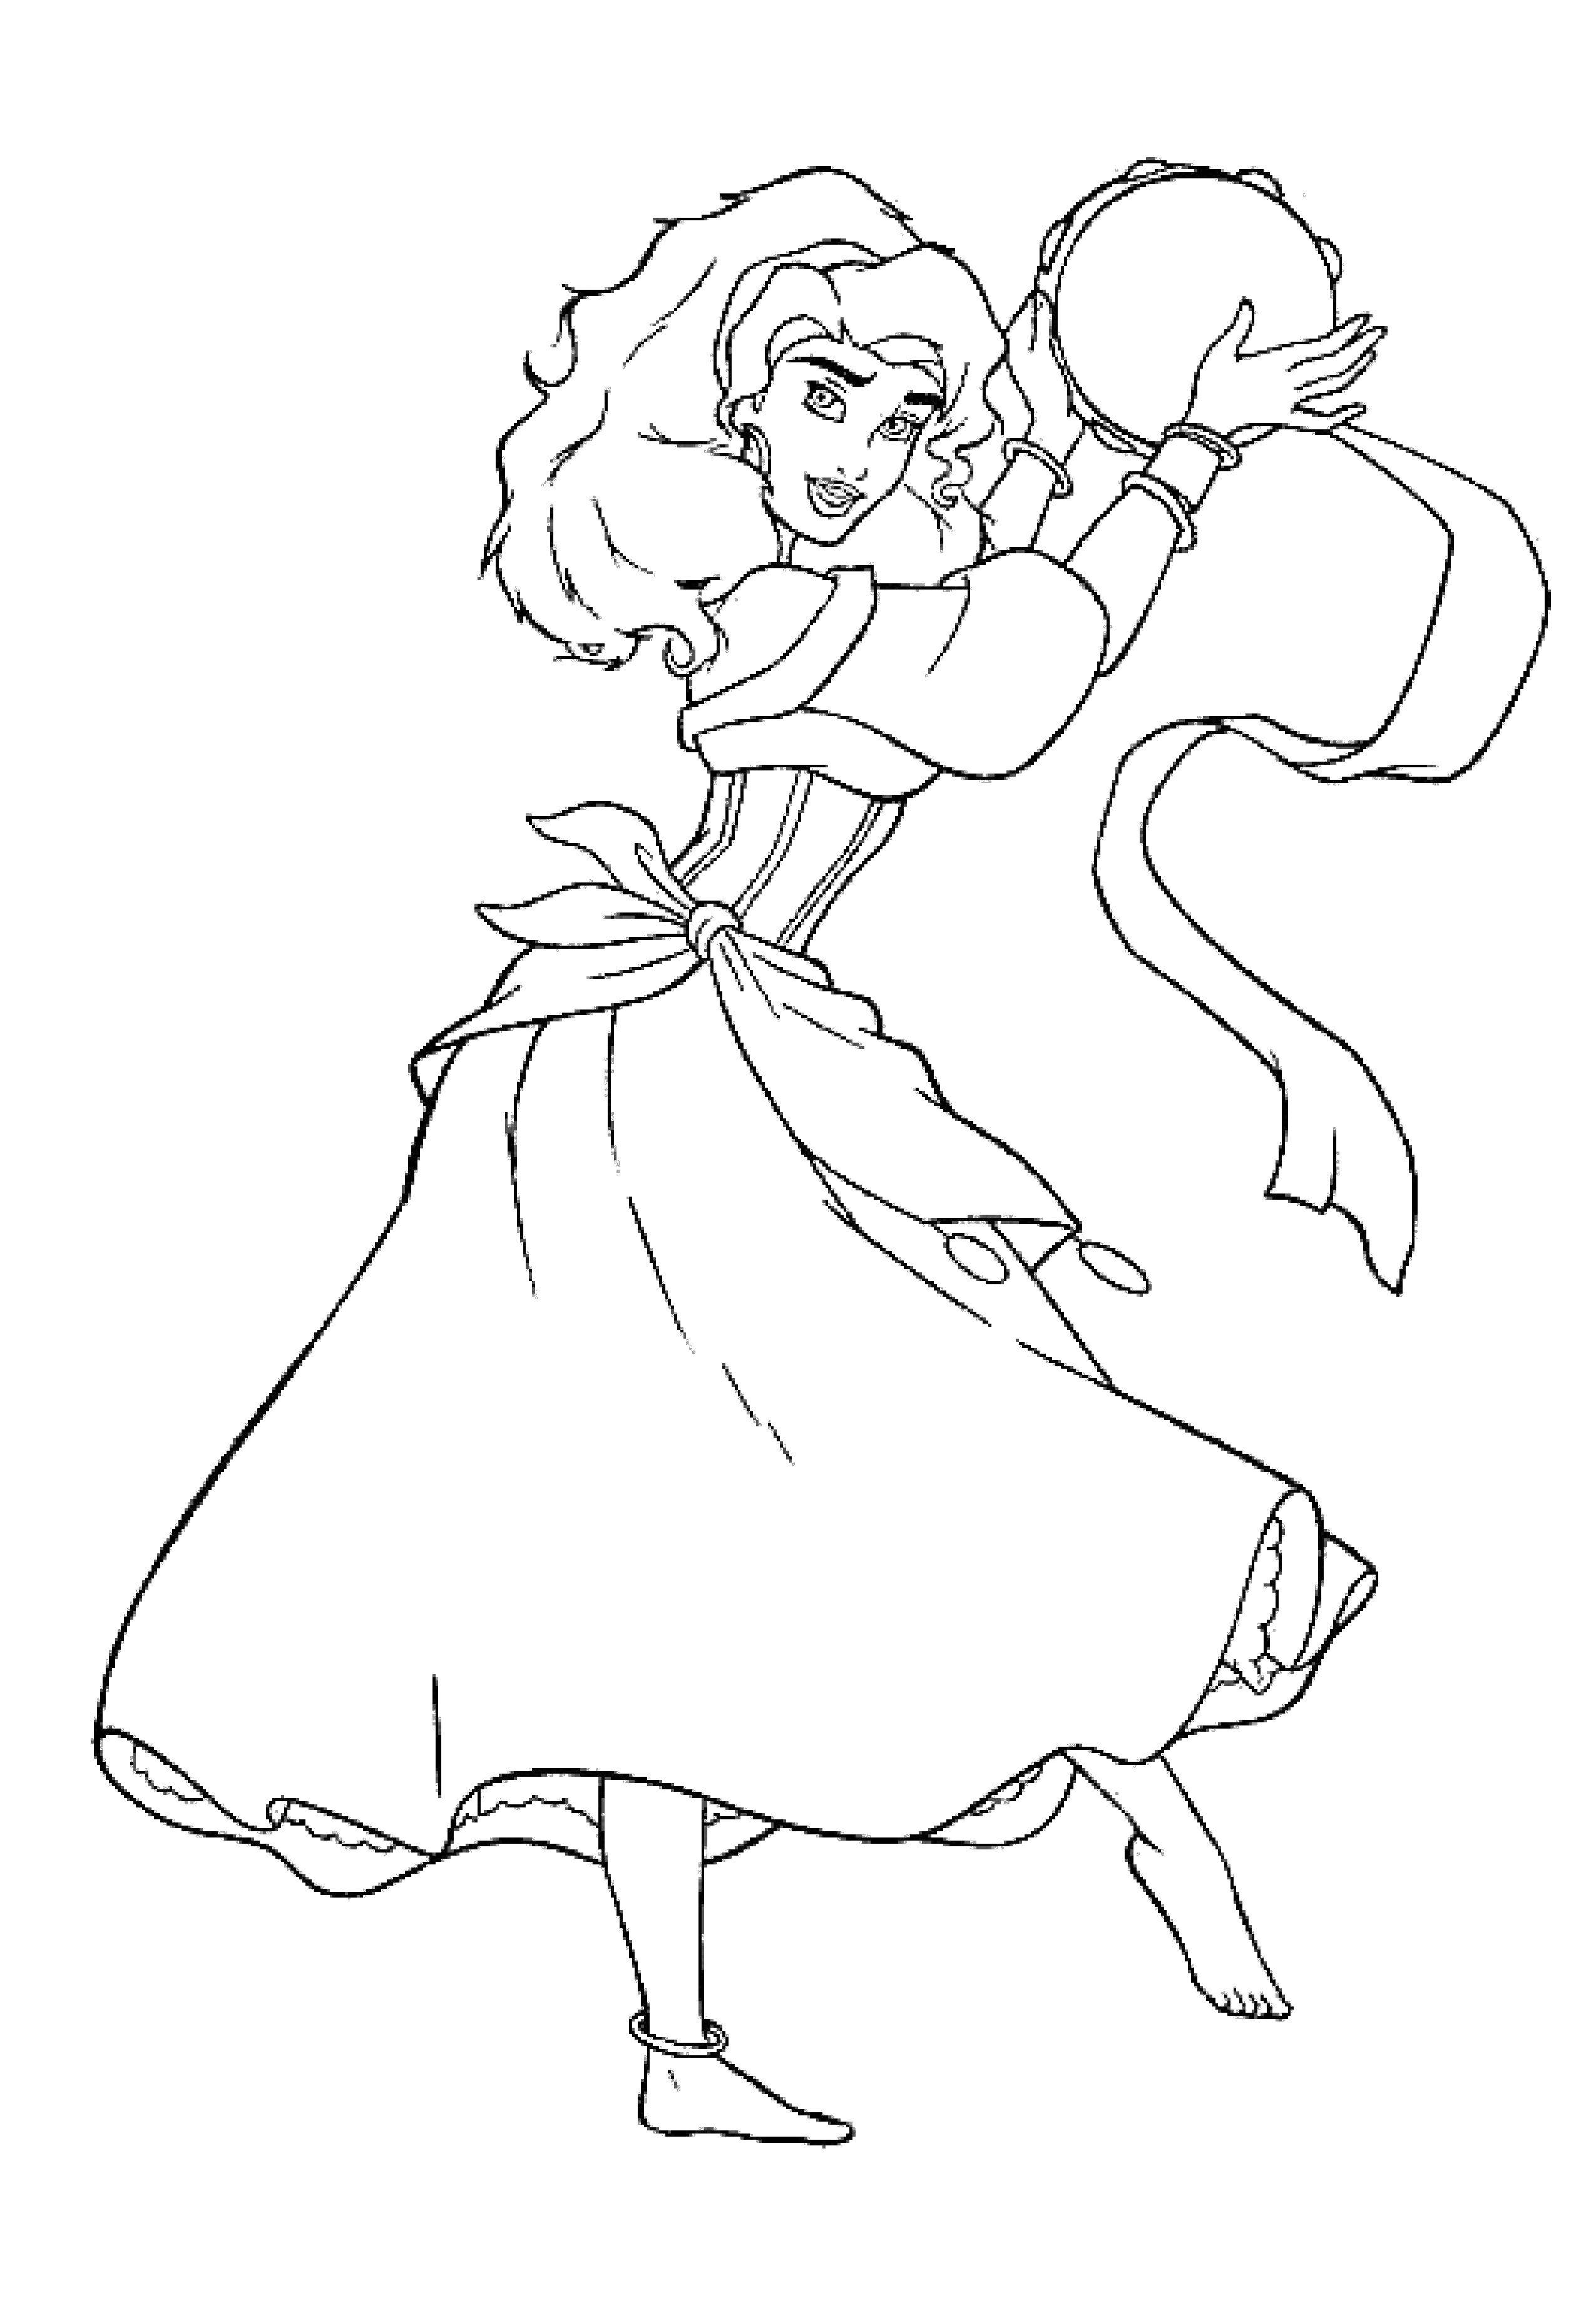 Coloring Gypsy girl with a tambourine. Category Disney coloring pages. Tags:  Cartoon character.